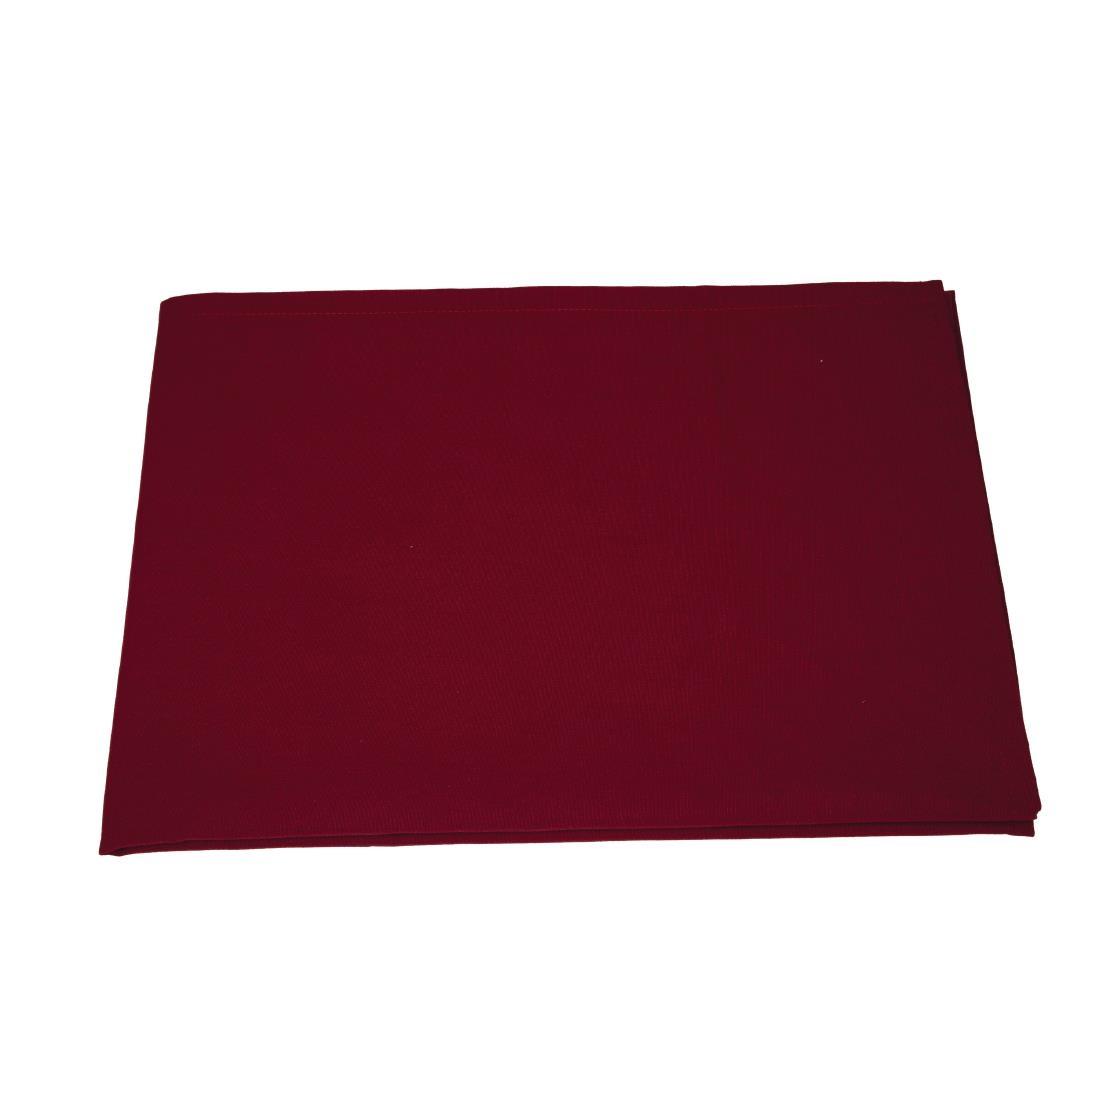 Occasions Tablecloth Burgundy 1350 x 1350mm - HB568  - 4